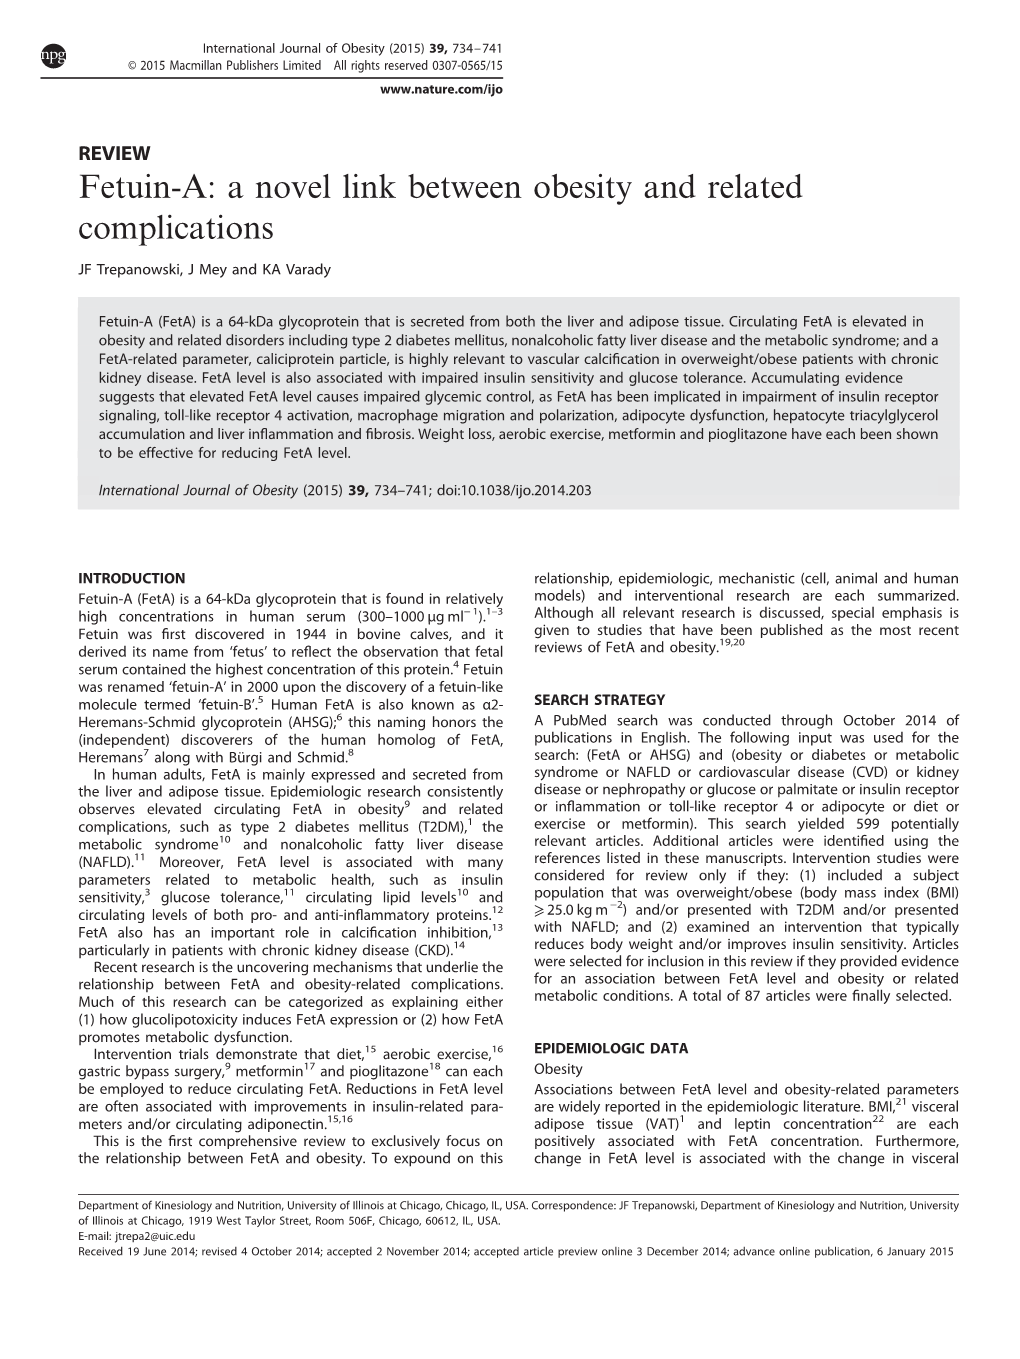 Fetuin-A: a Novel Link Between Obesity and Related Complications